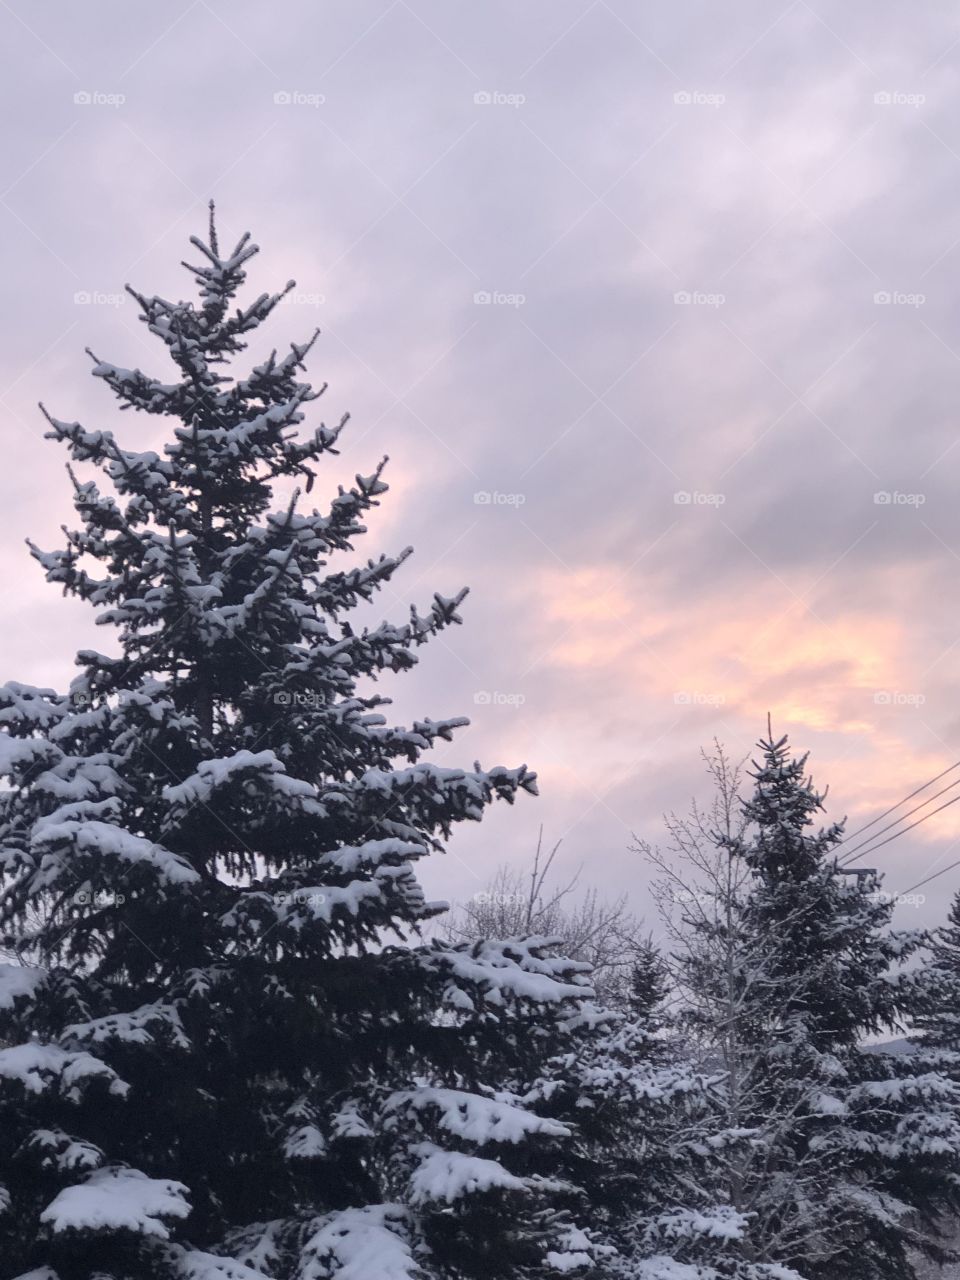 Snowy trees with a purple sky in Colorado on this beautiful Saturday morning. 